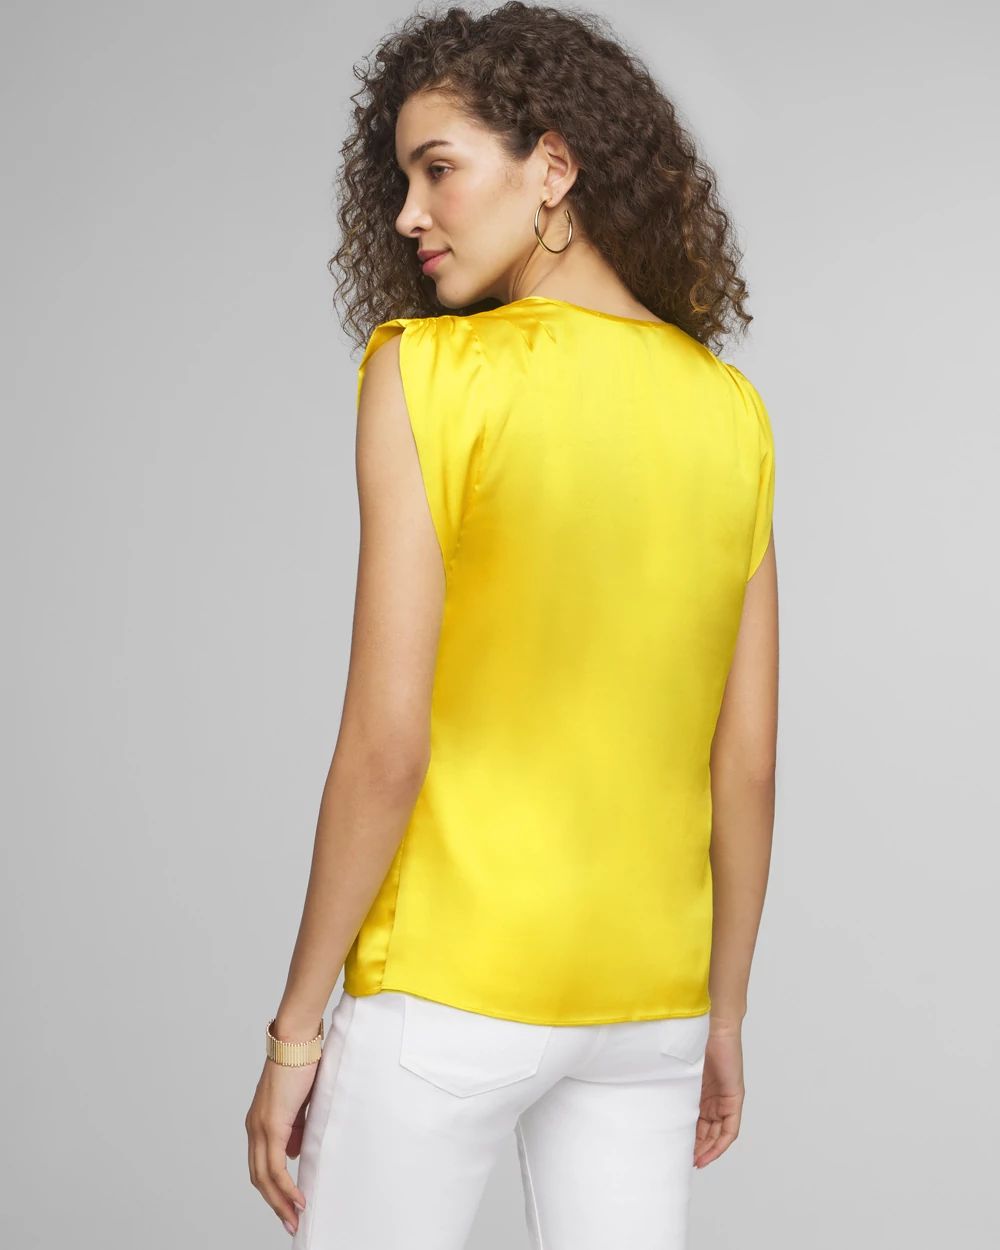 Sleeveless V-neck Ruched Shoulder Shell Top click to view larger image.